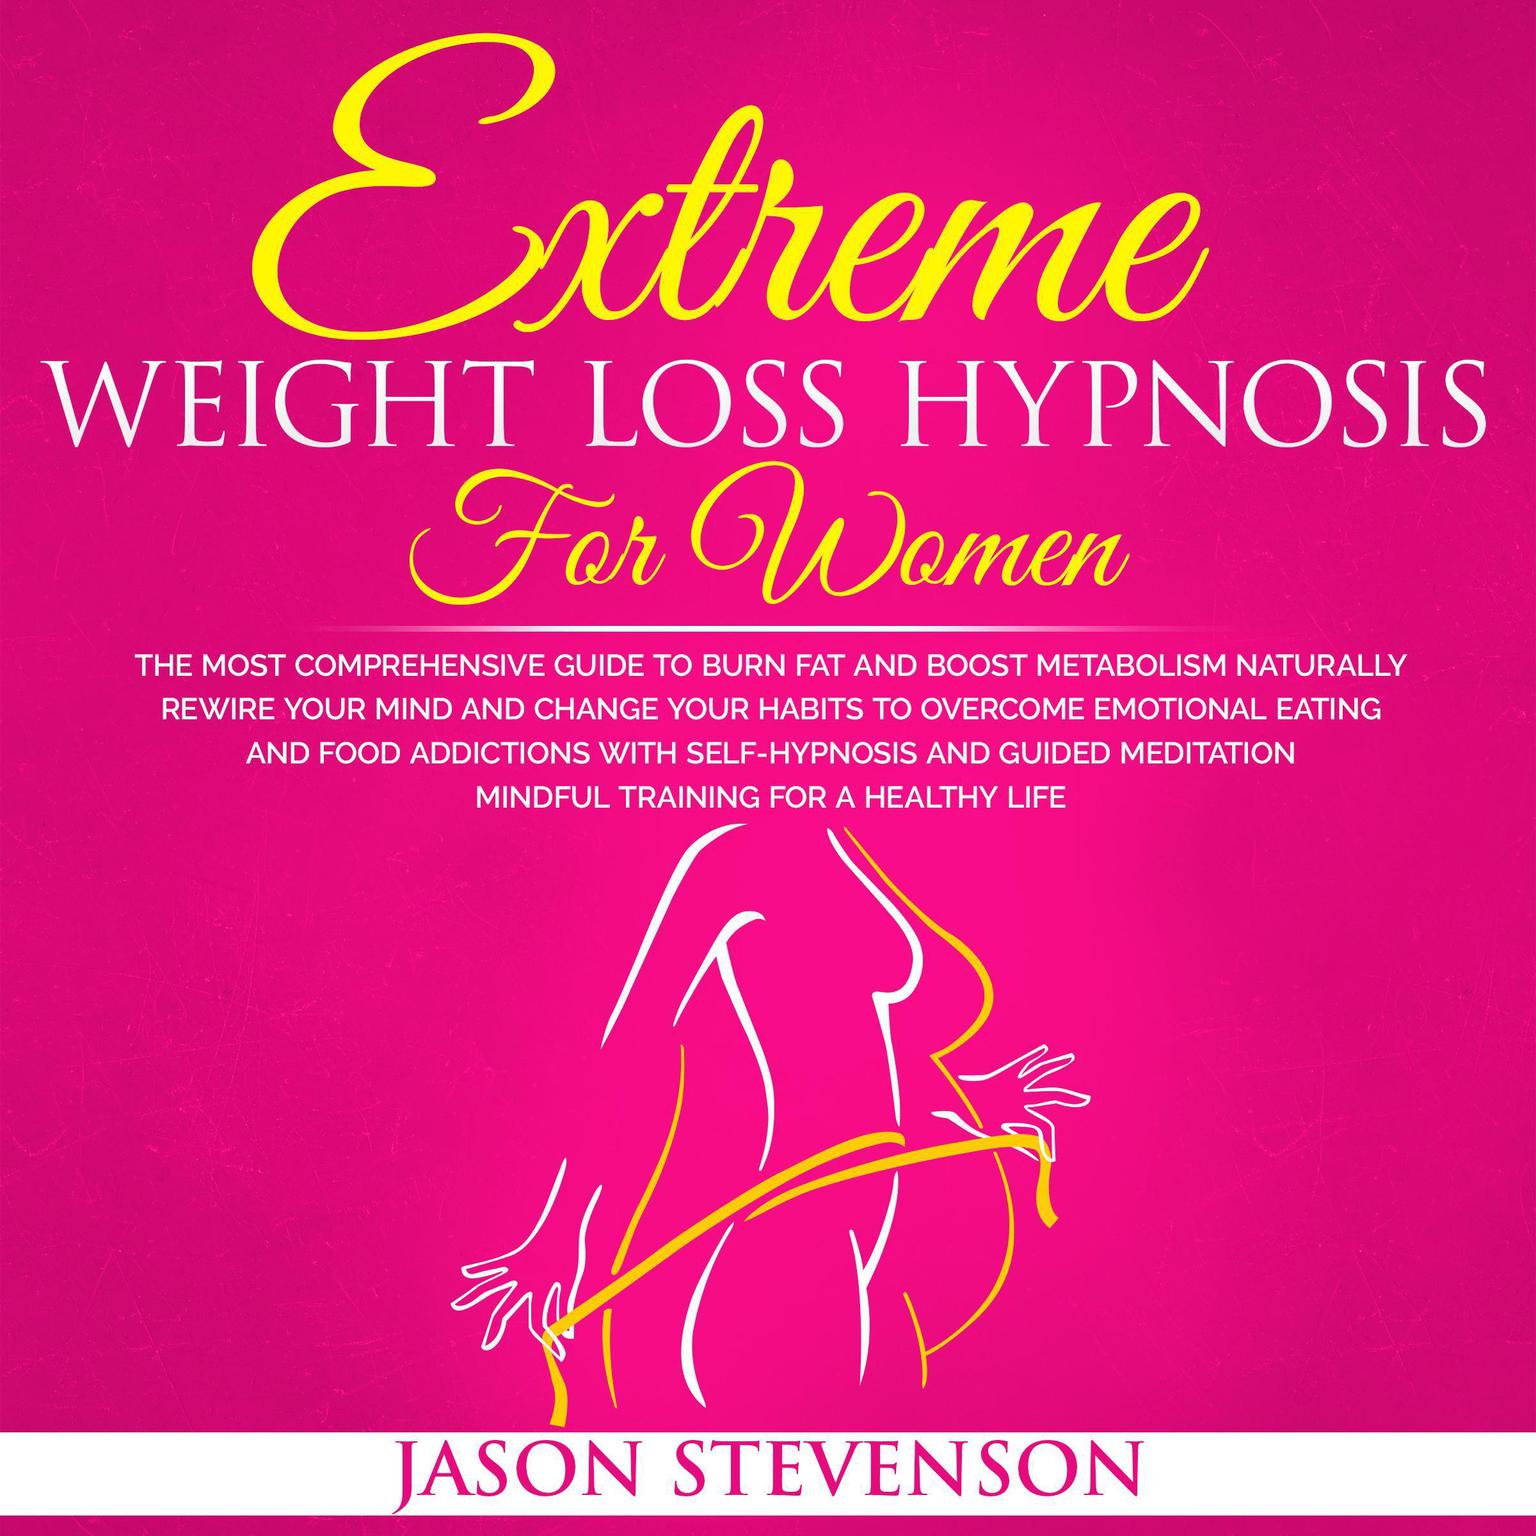 Extreme Weight Loss Hypnosis for Women (Abridged): The Most Comprehensive Guide to Burn Fat and Boost Metabolism Naturally. Rewire Your Mind and Change Your Habits to Overcome Emotional Eating and Food Addictions With Self Hypnosis and Guided Meditation - Mindful Training for Healthy Life Audiobook, by Jason Stevenson